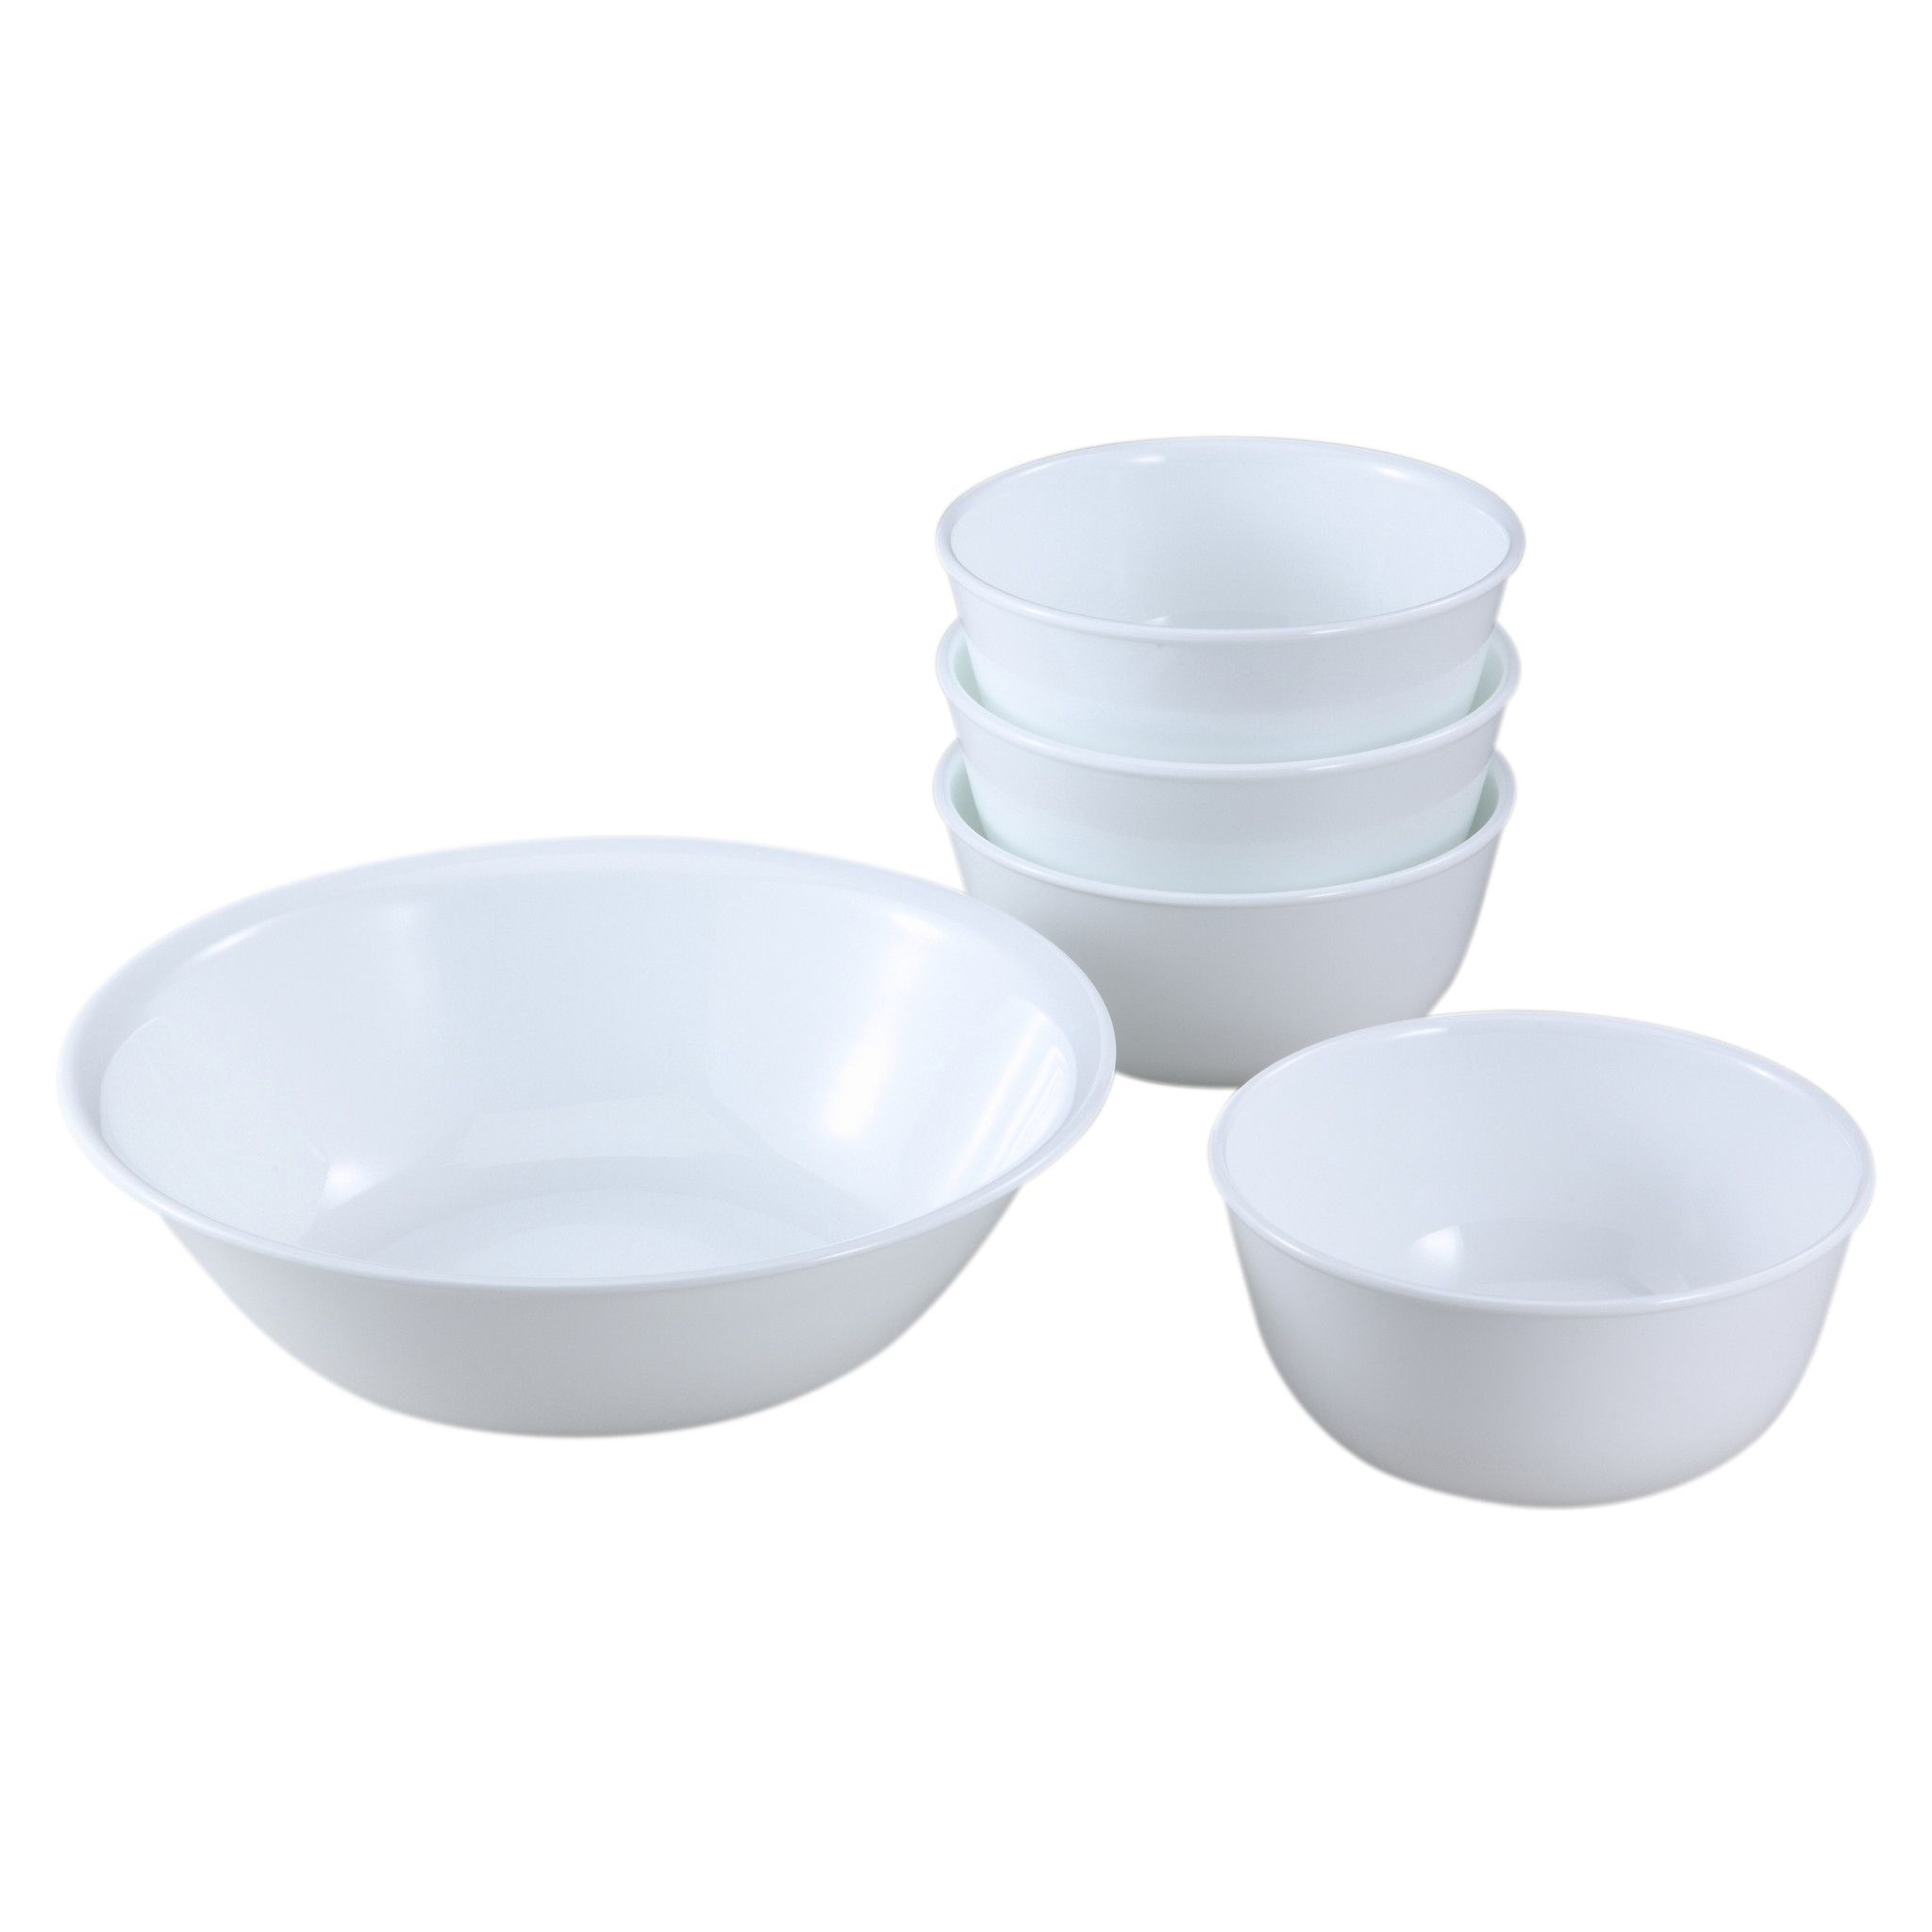 Corelle Winter Frost White 5-piece Snack Set - image 3 of 12